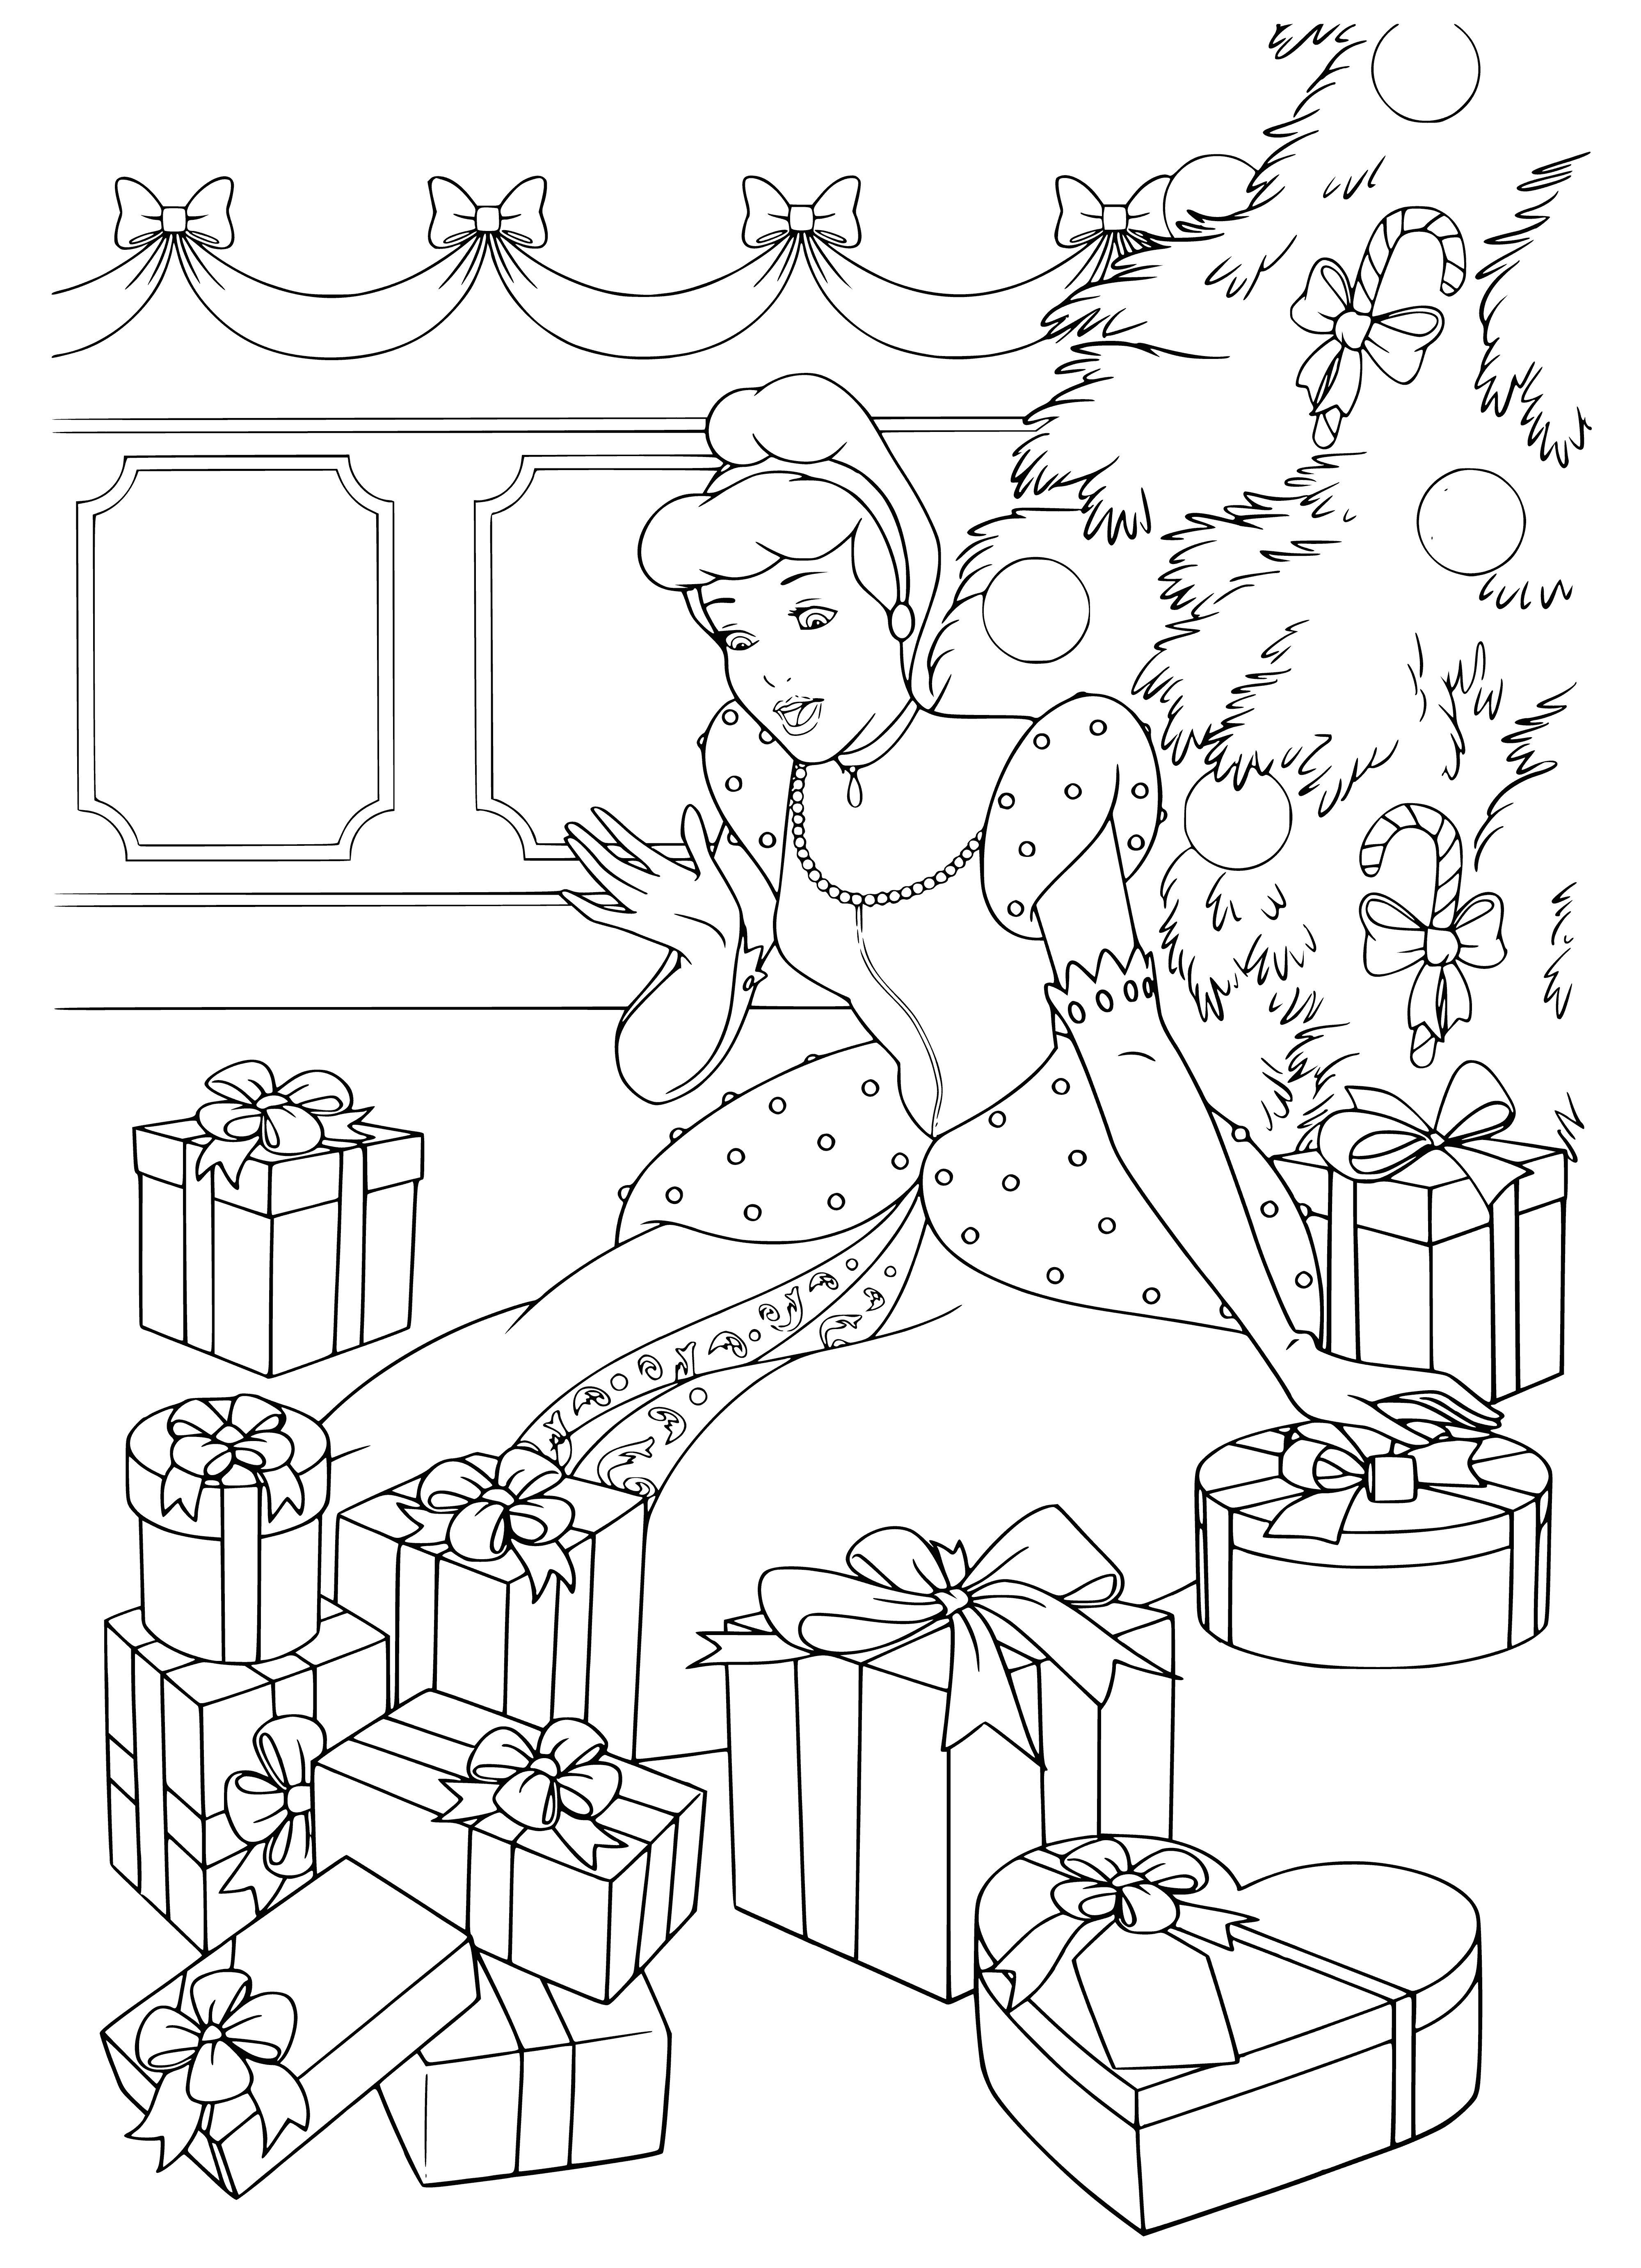 Gifts under the tree coloring page